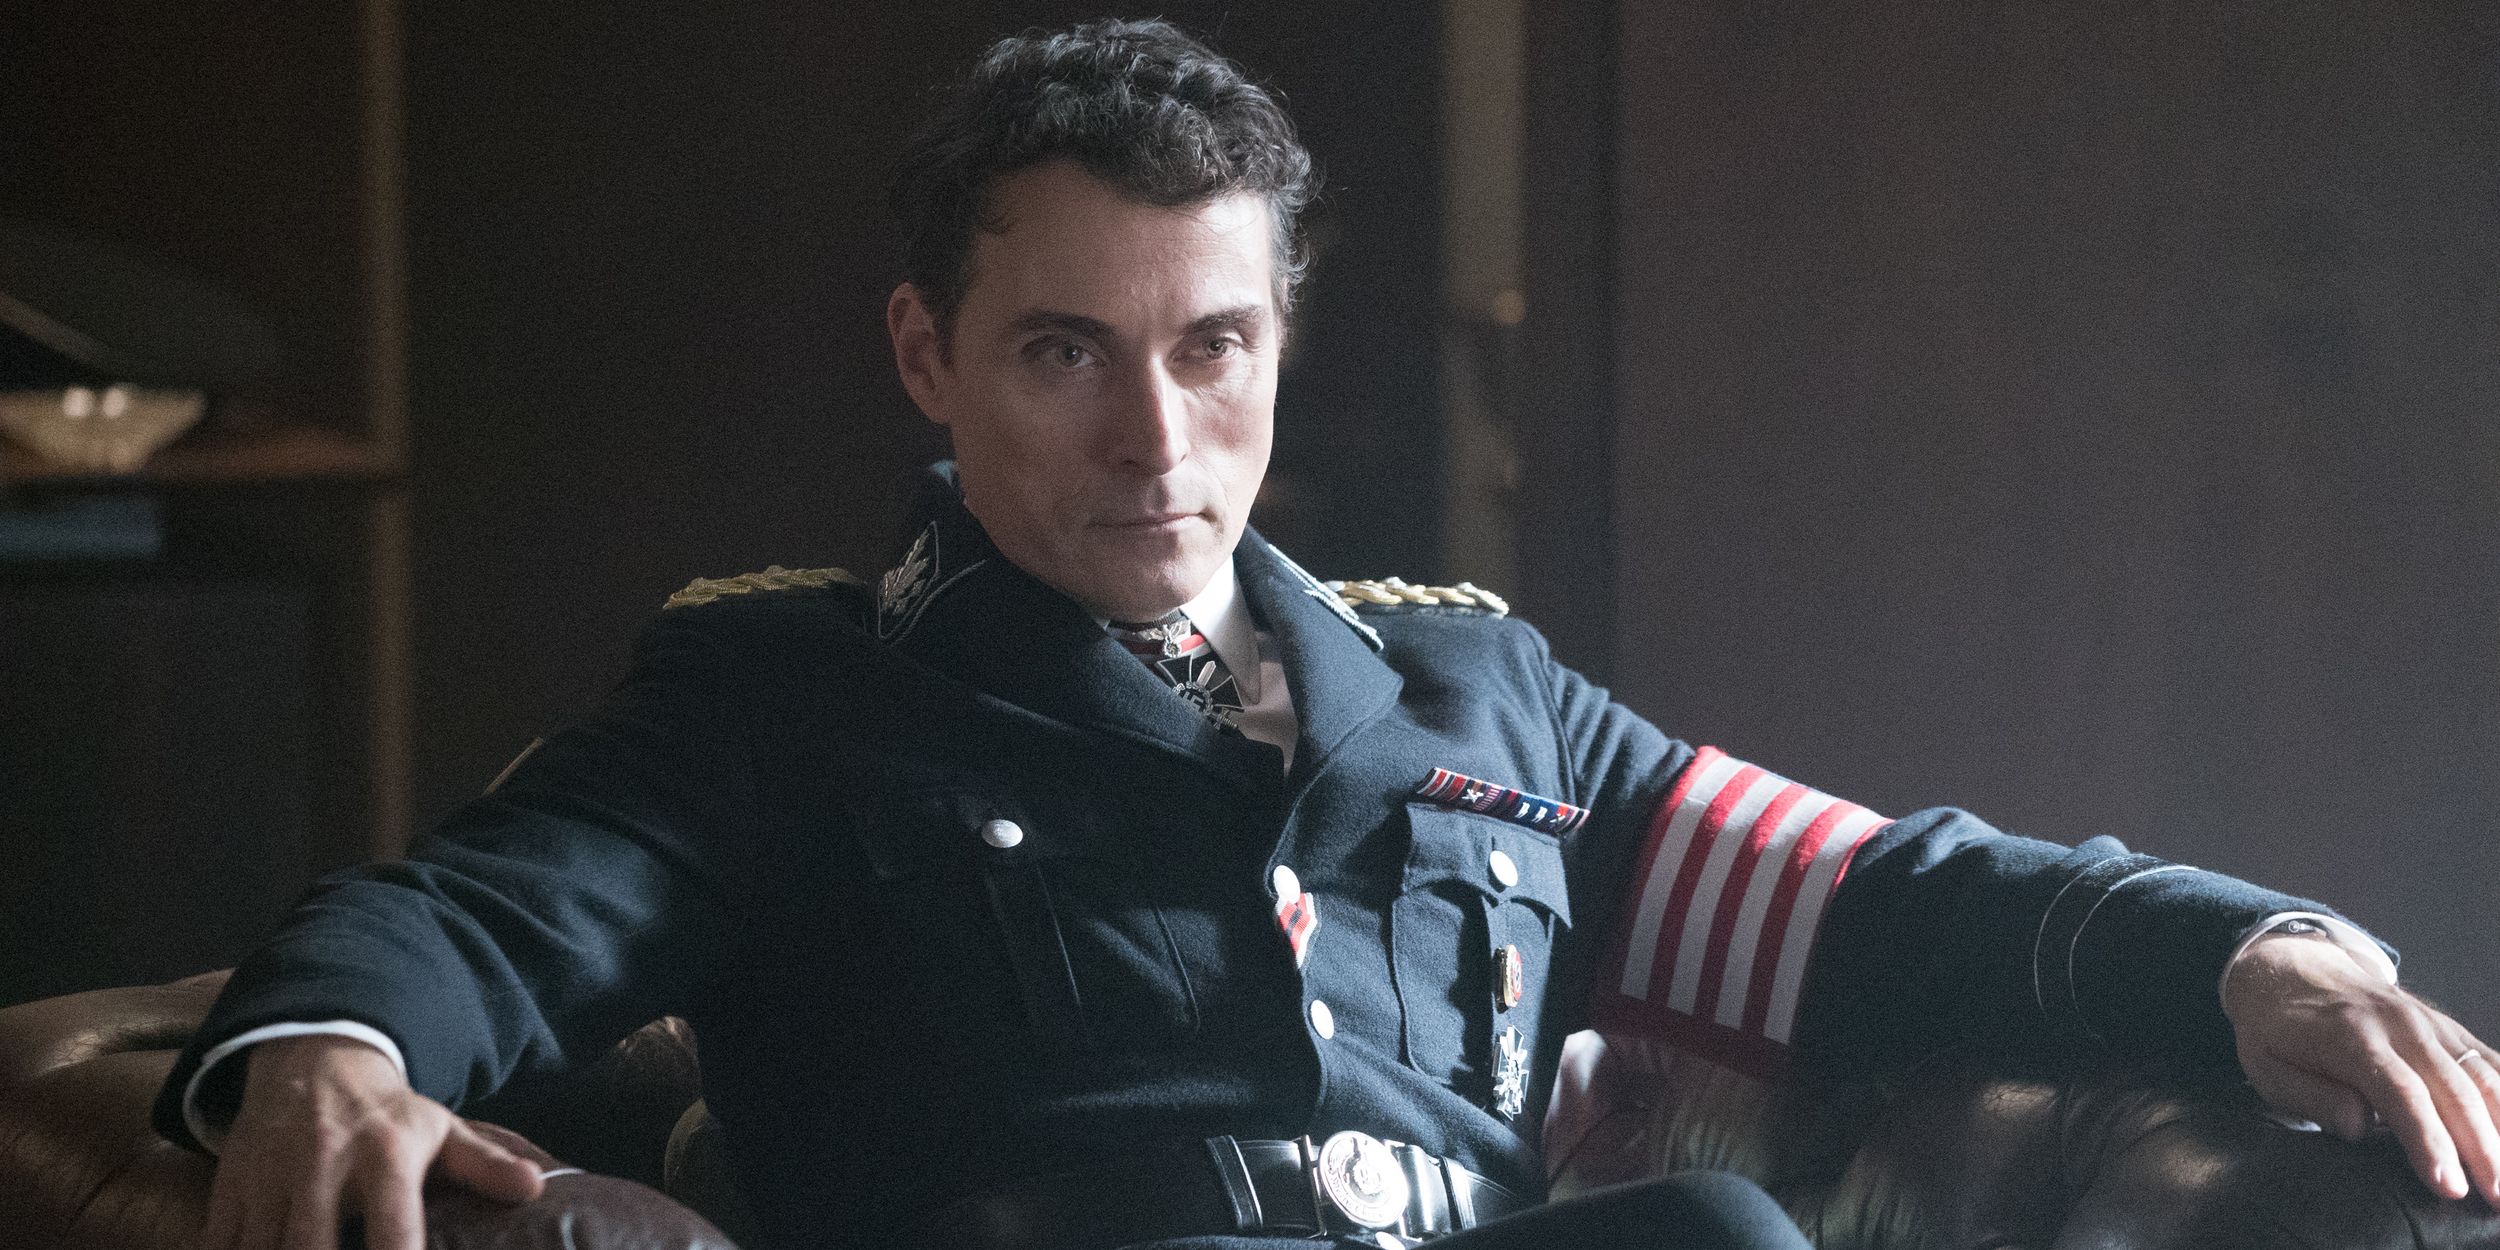 Rufus Sewell in The Man in the High Castle Season 2